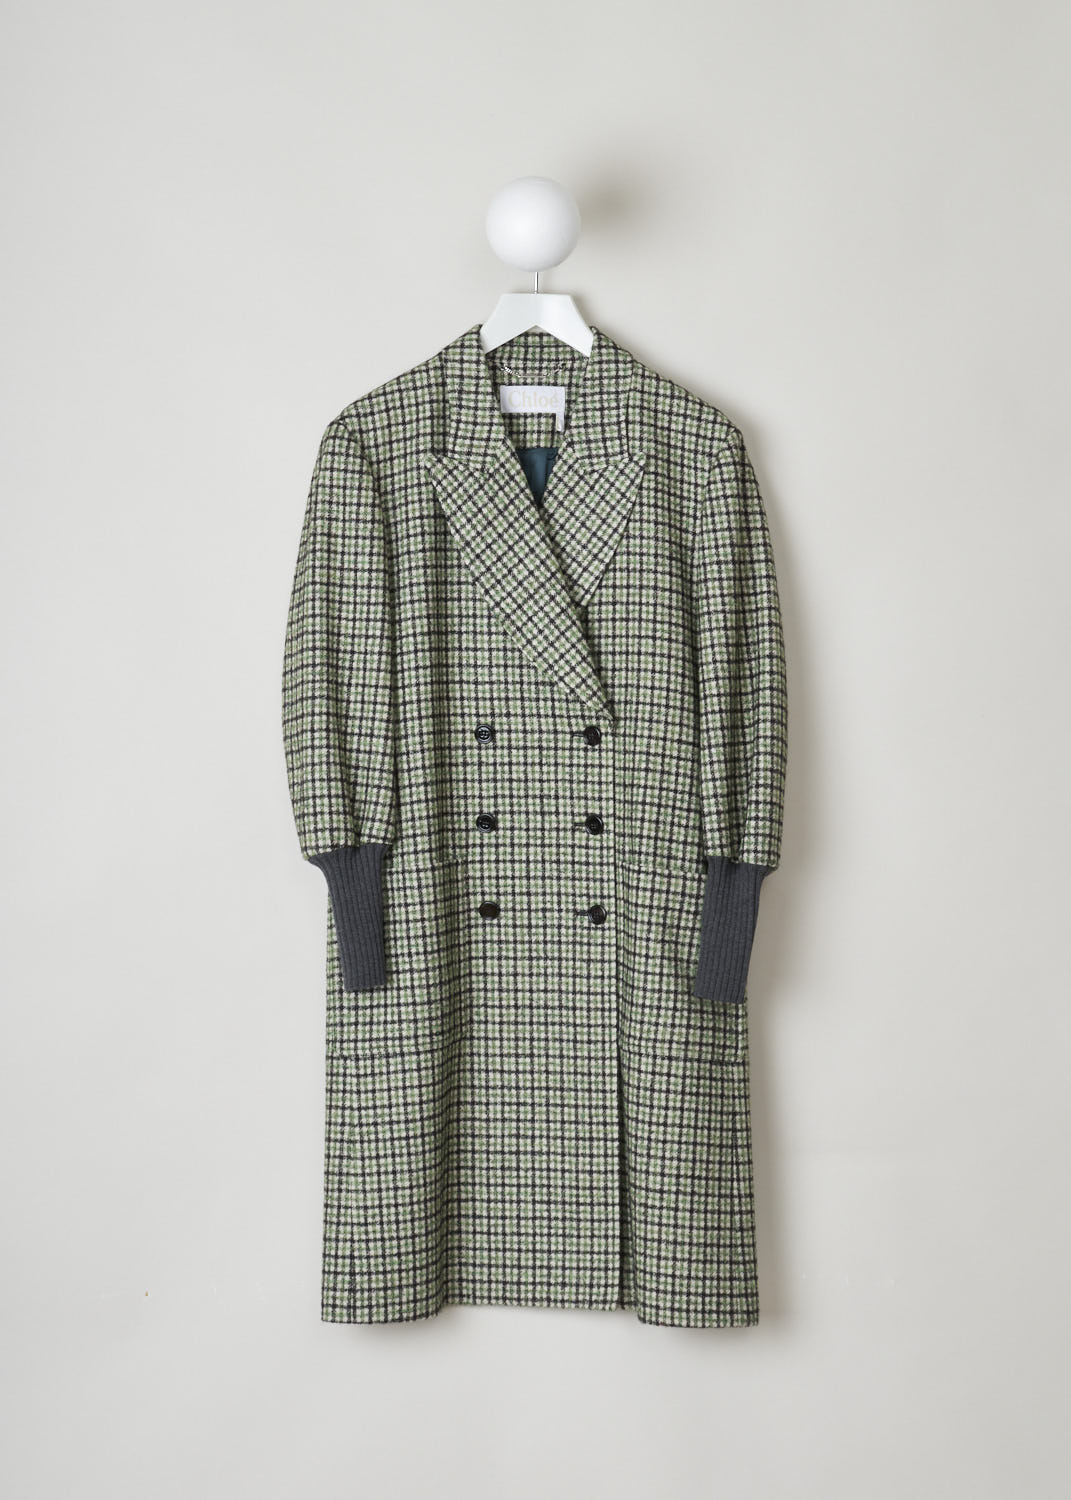 CHLOÃ‰, VIBRANT GREEN CHECK COAT, CHC21AMA1806439T40, Green, Print, Front, This beautiful vibrant green check coat is soft to the touch. This double breasted coat has a peaked lapel. Across the front, two rows with buttons can be found. Also on the front are two patch pockets. Standing out are the exaggerated knitted cuffs. 